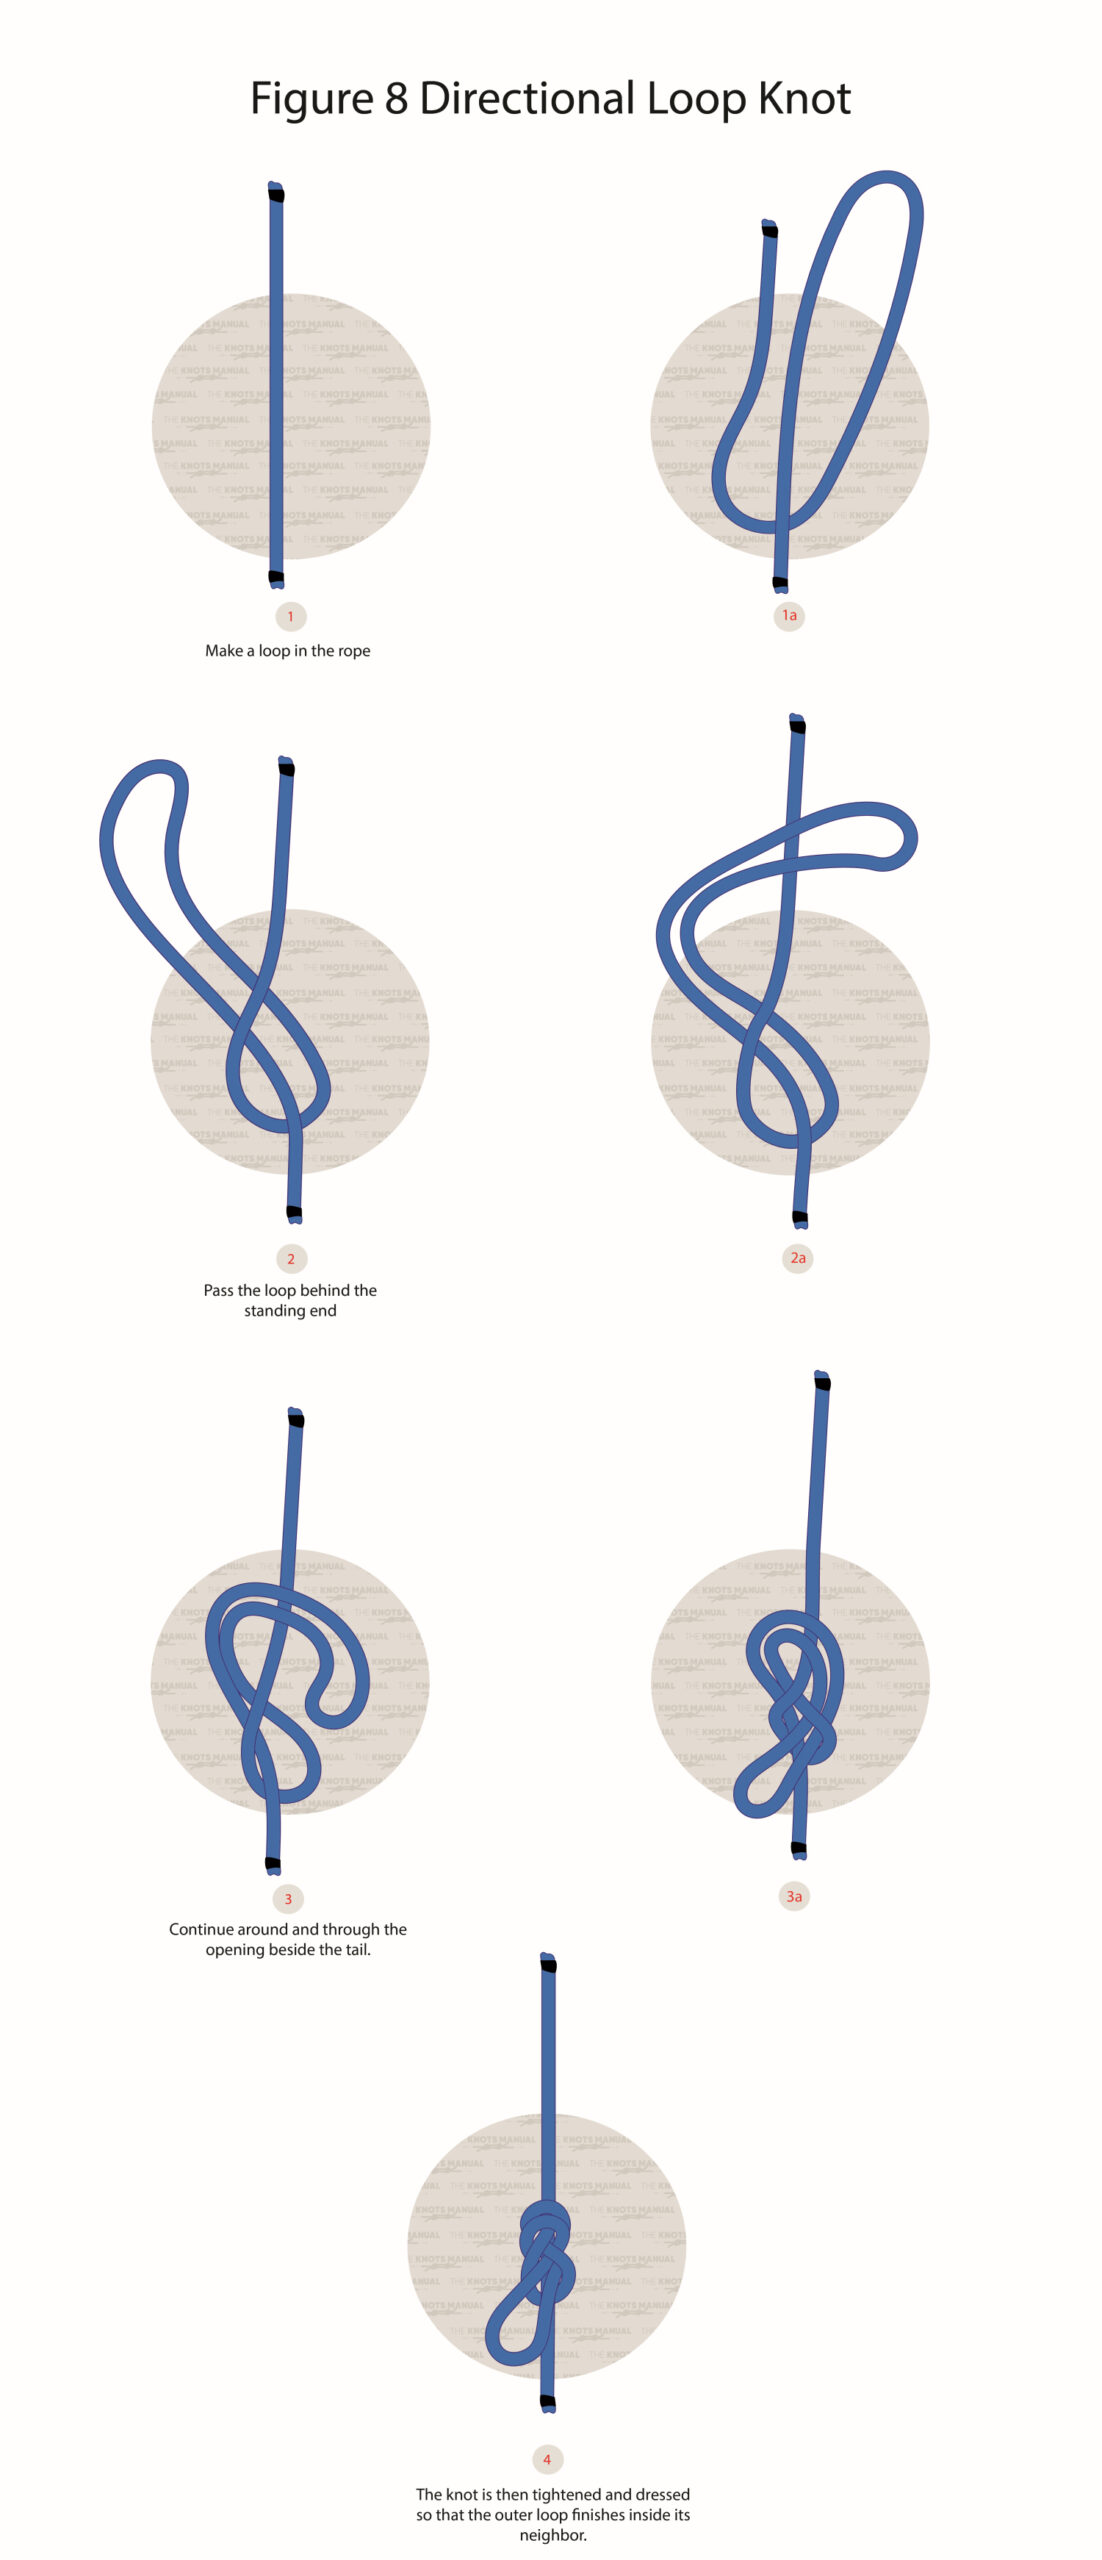 Figure 8 Directional Loop Knot step by step guide